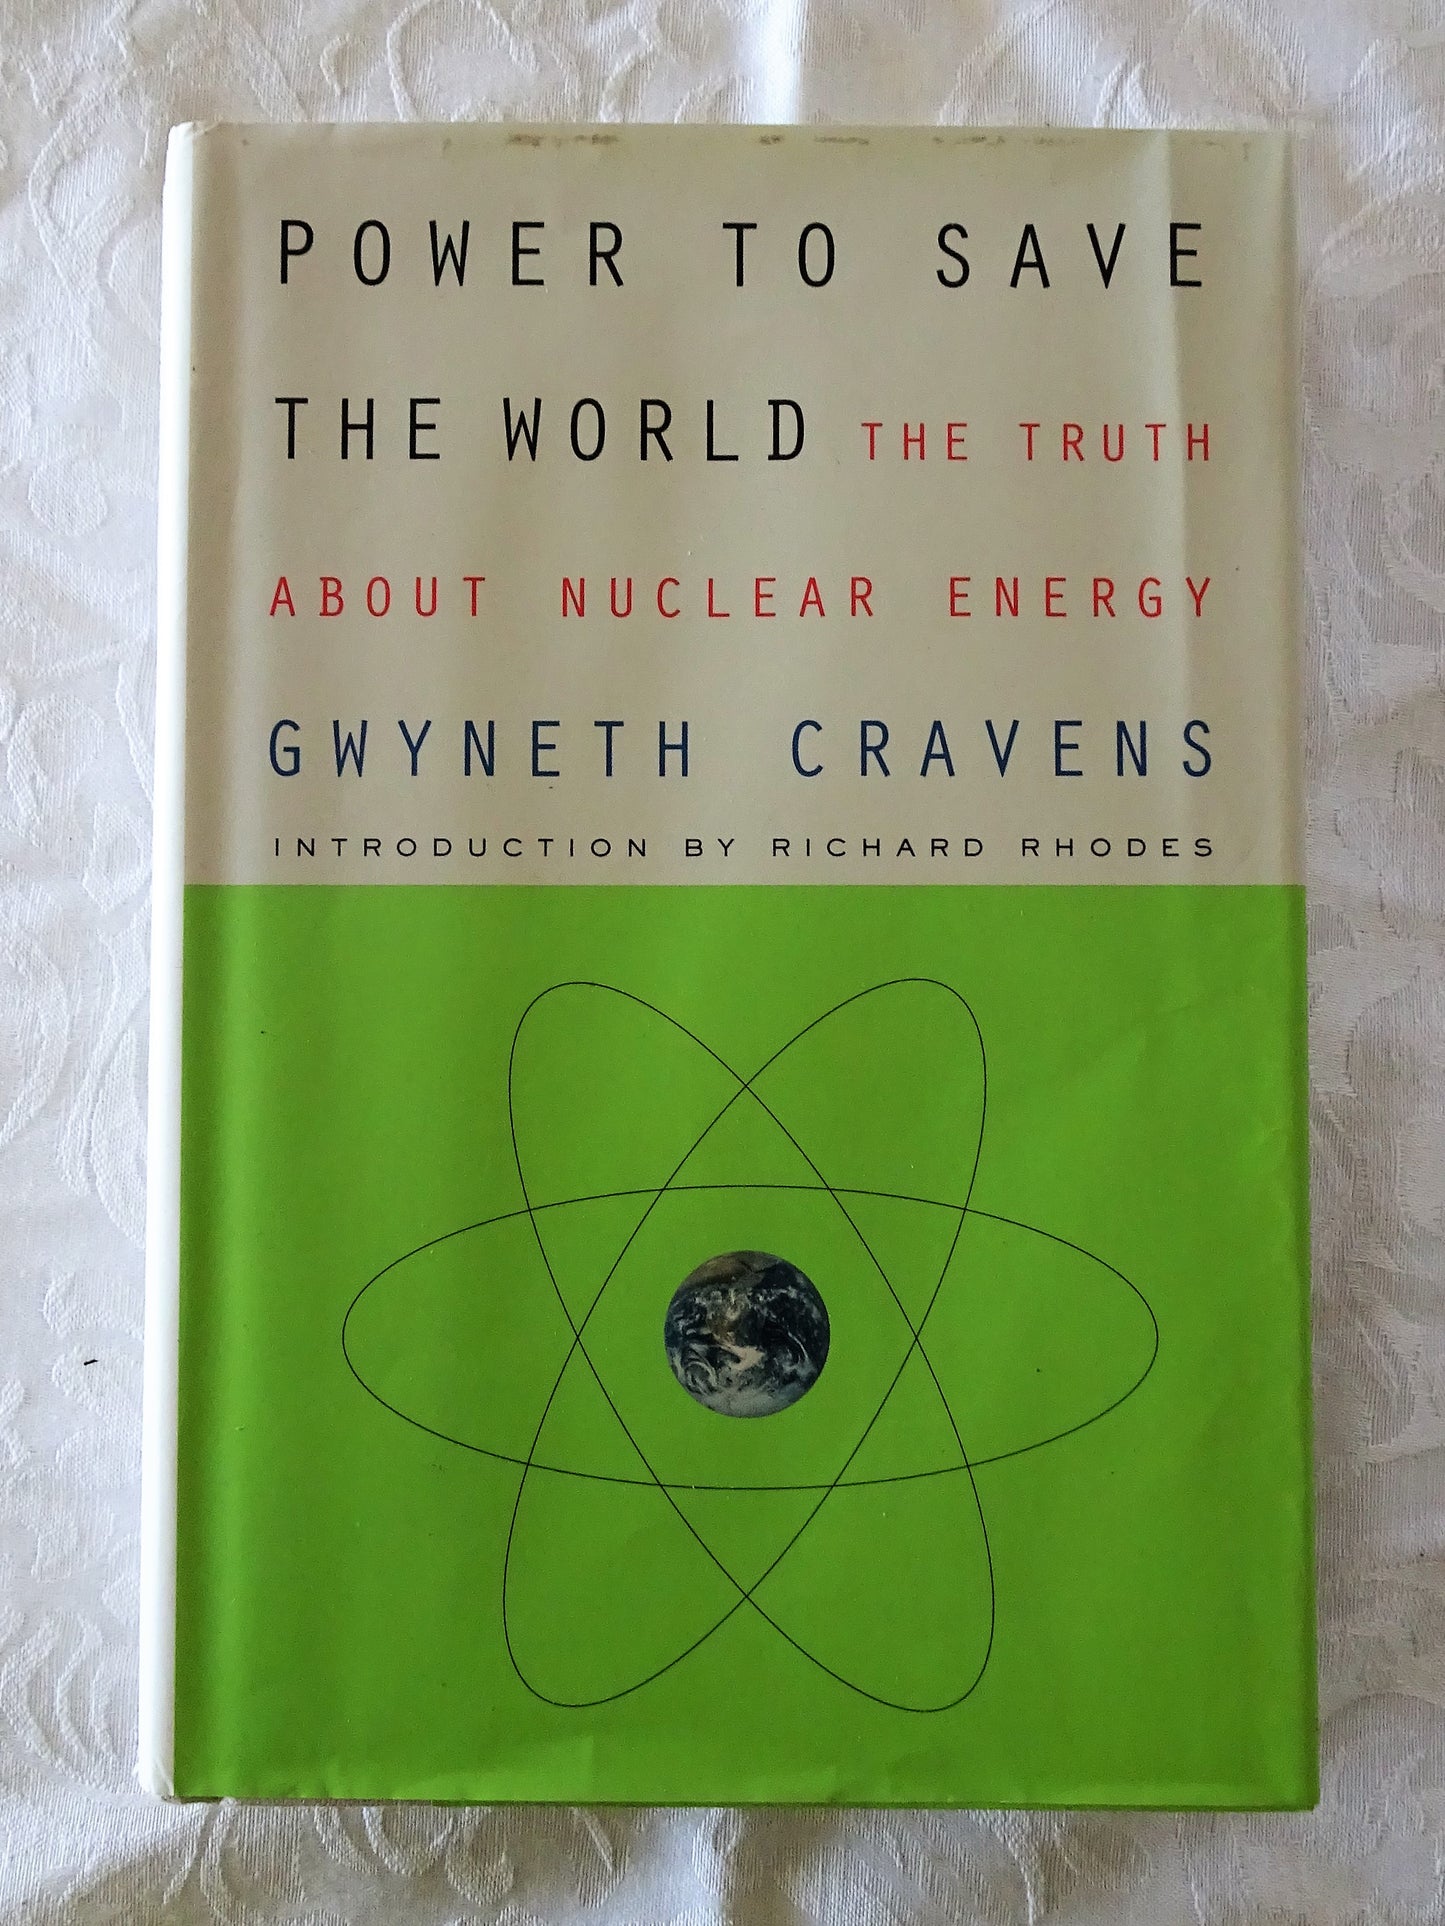 Power To Save The World by Gwyneth Cravens